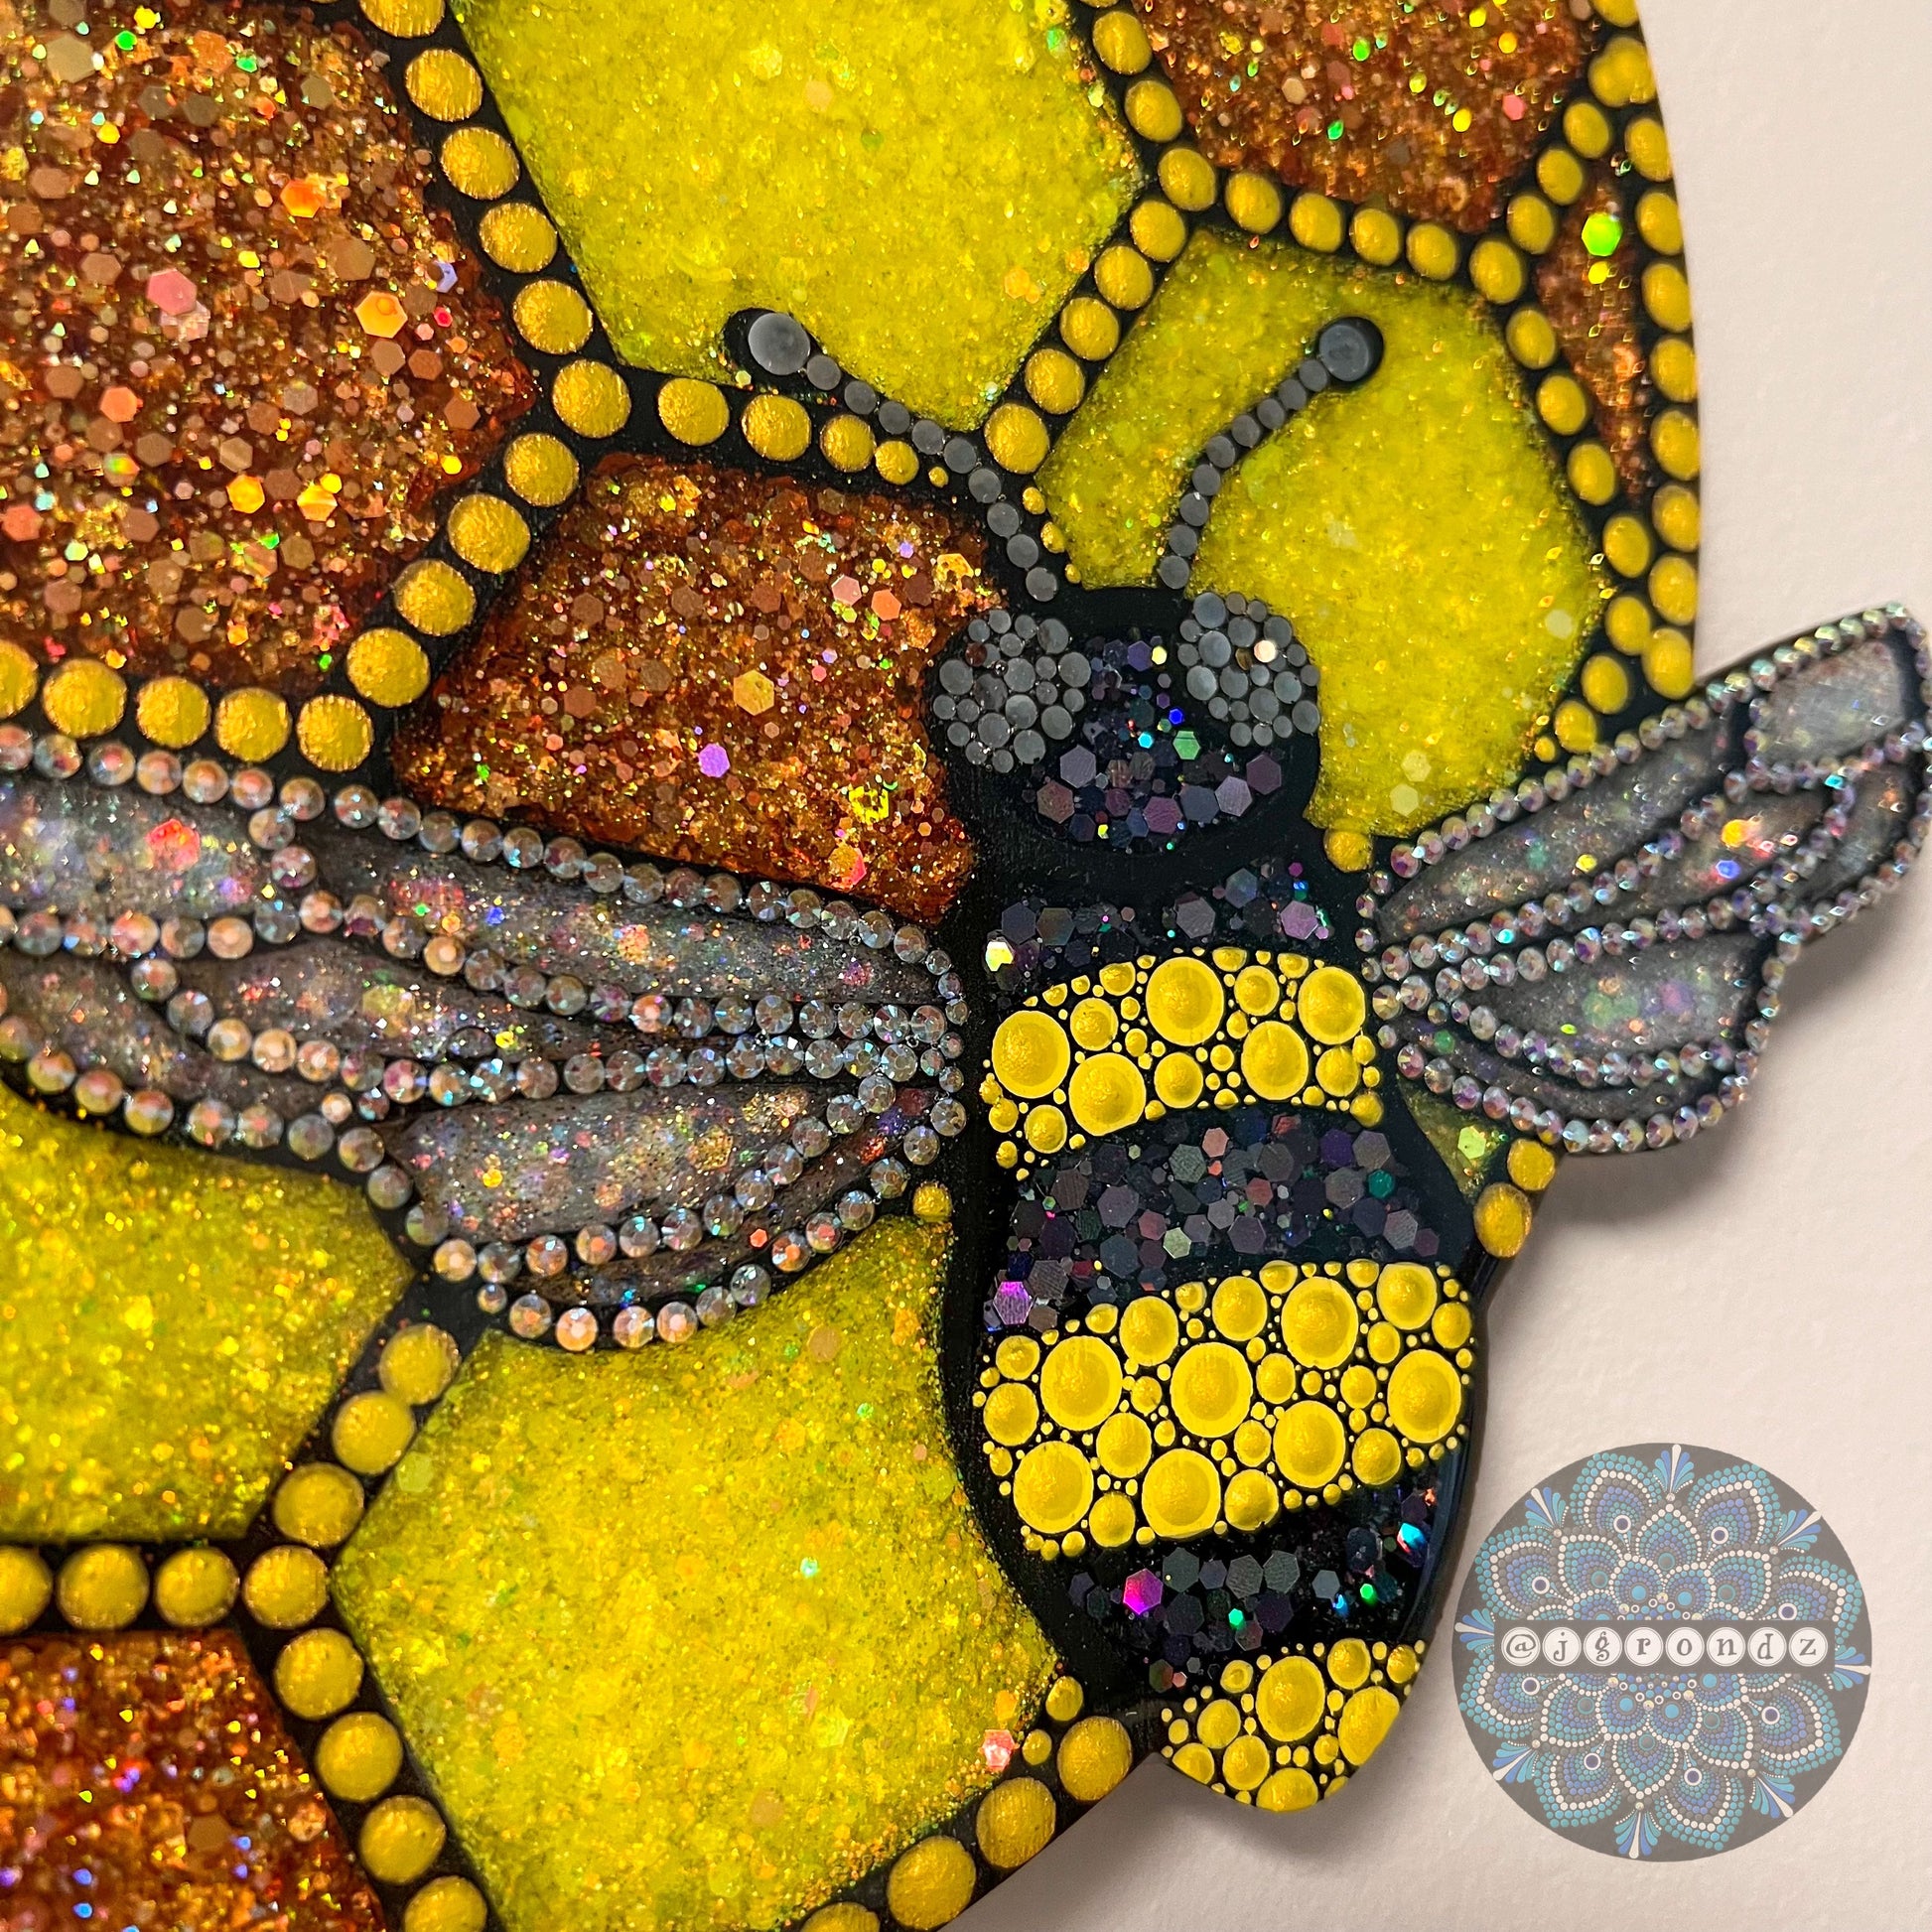 Wall Art / Bee Decor - Honeycomb Be Kind With Resin